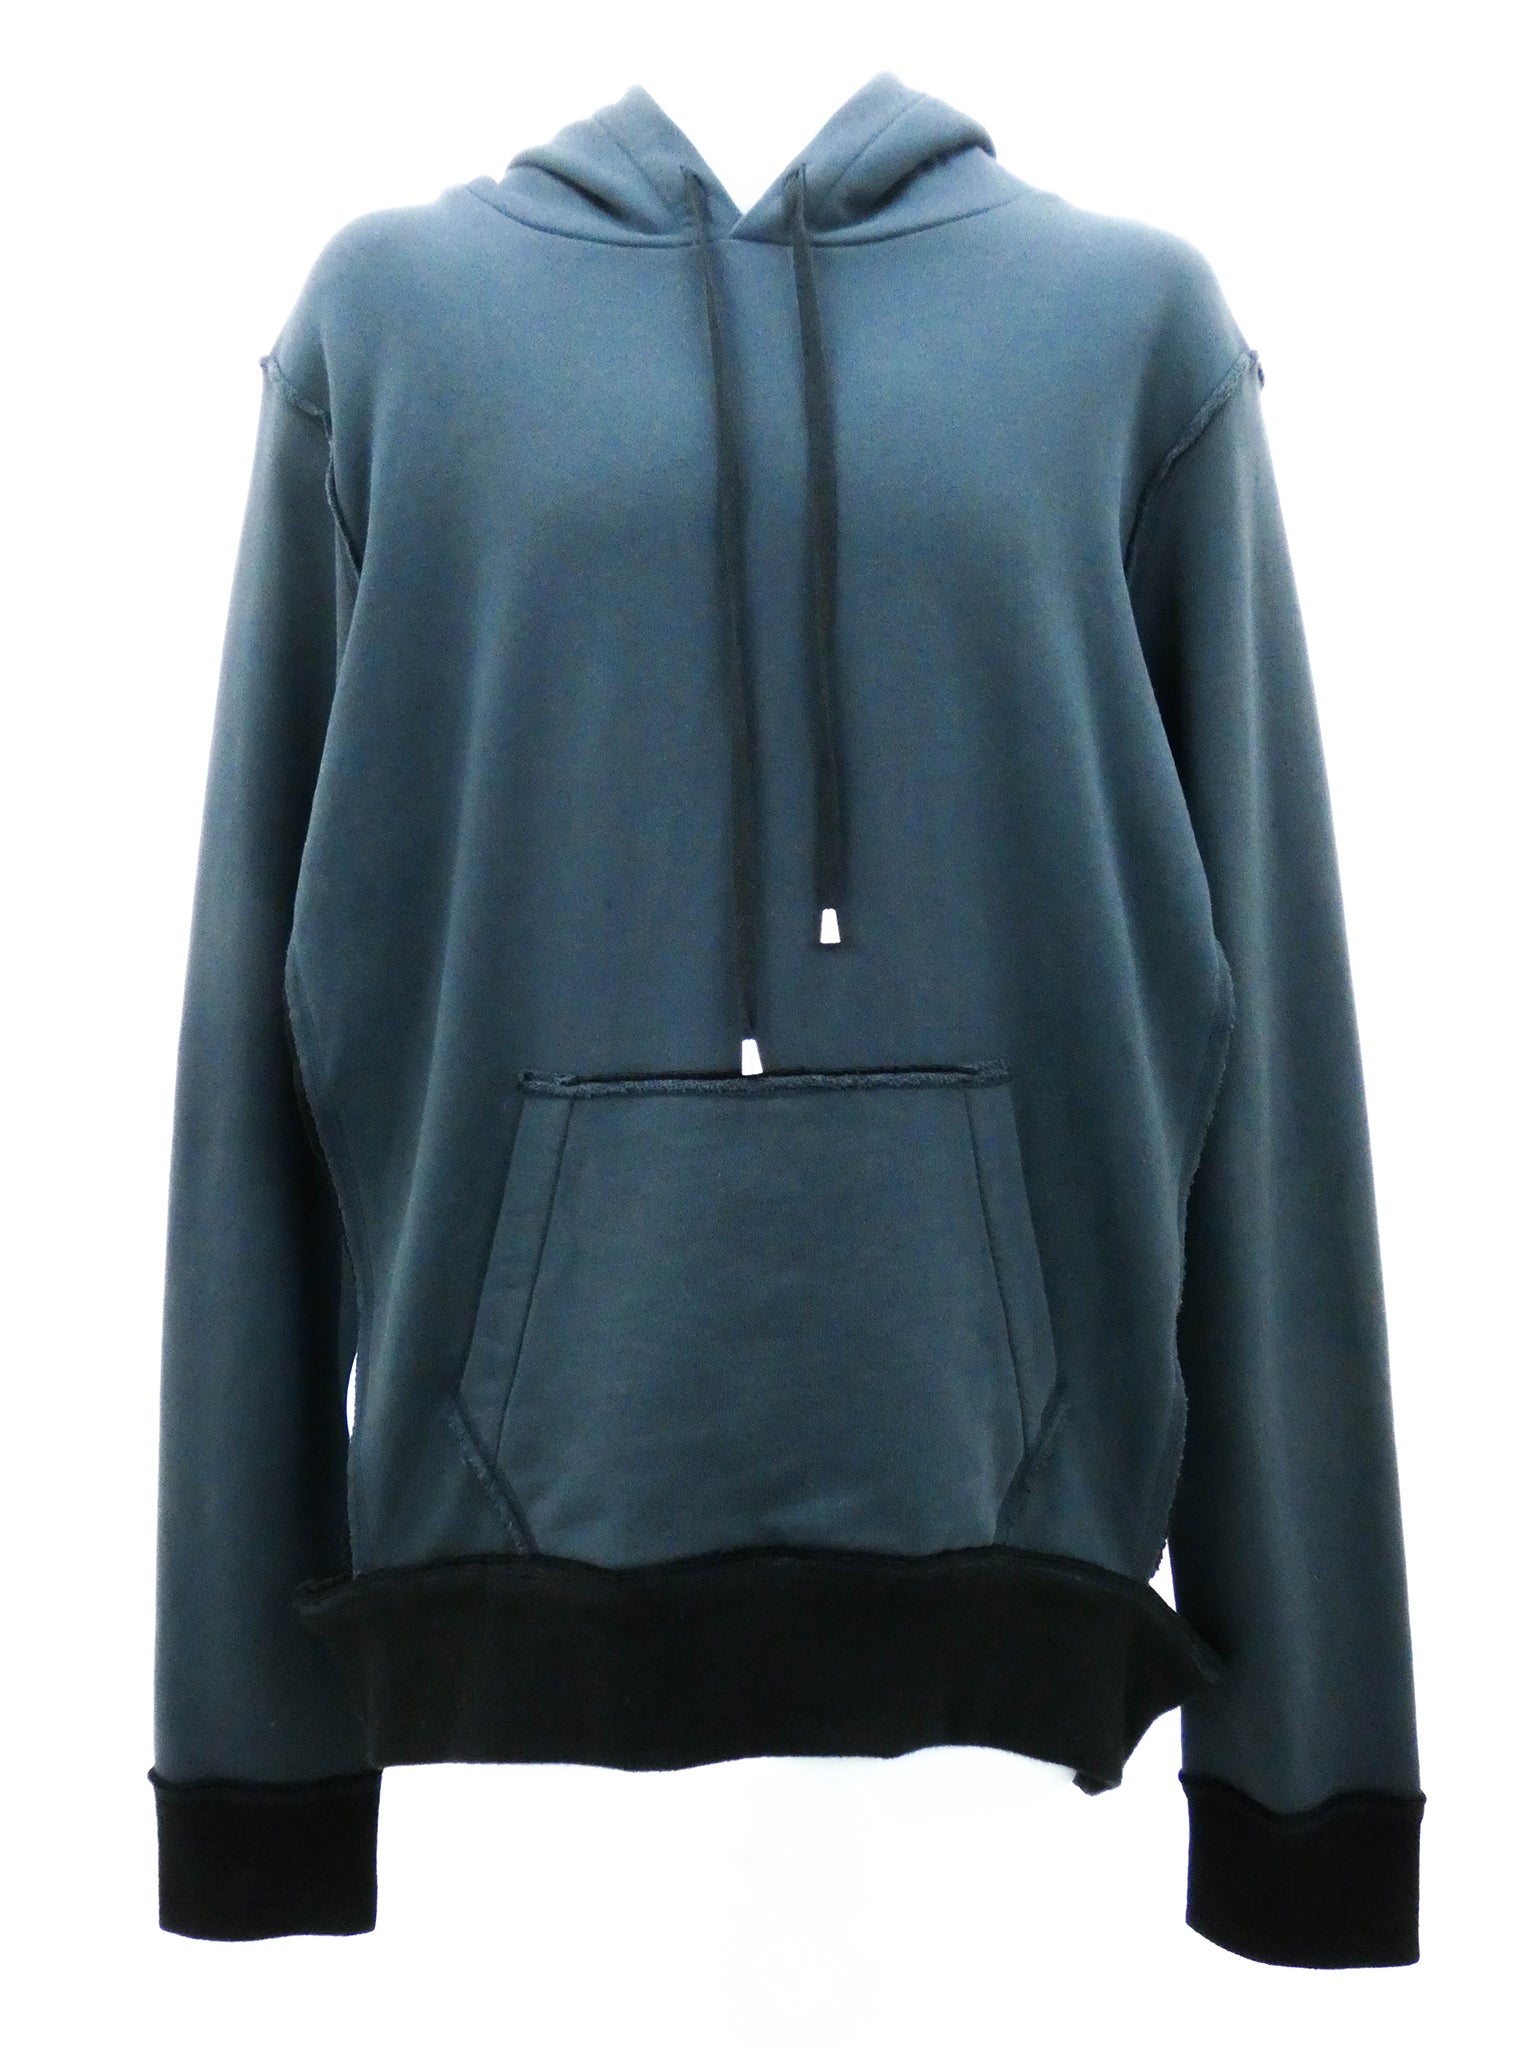 BLUE/GREY COTTON HOODED SWEATSHIRT WITH CUT OUT DETAILING